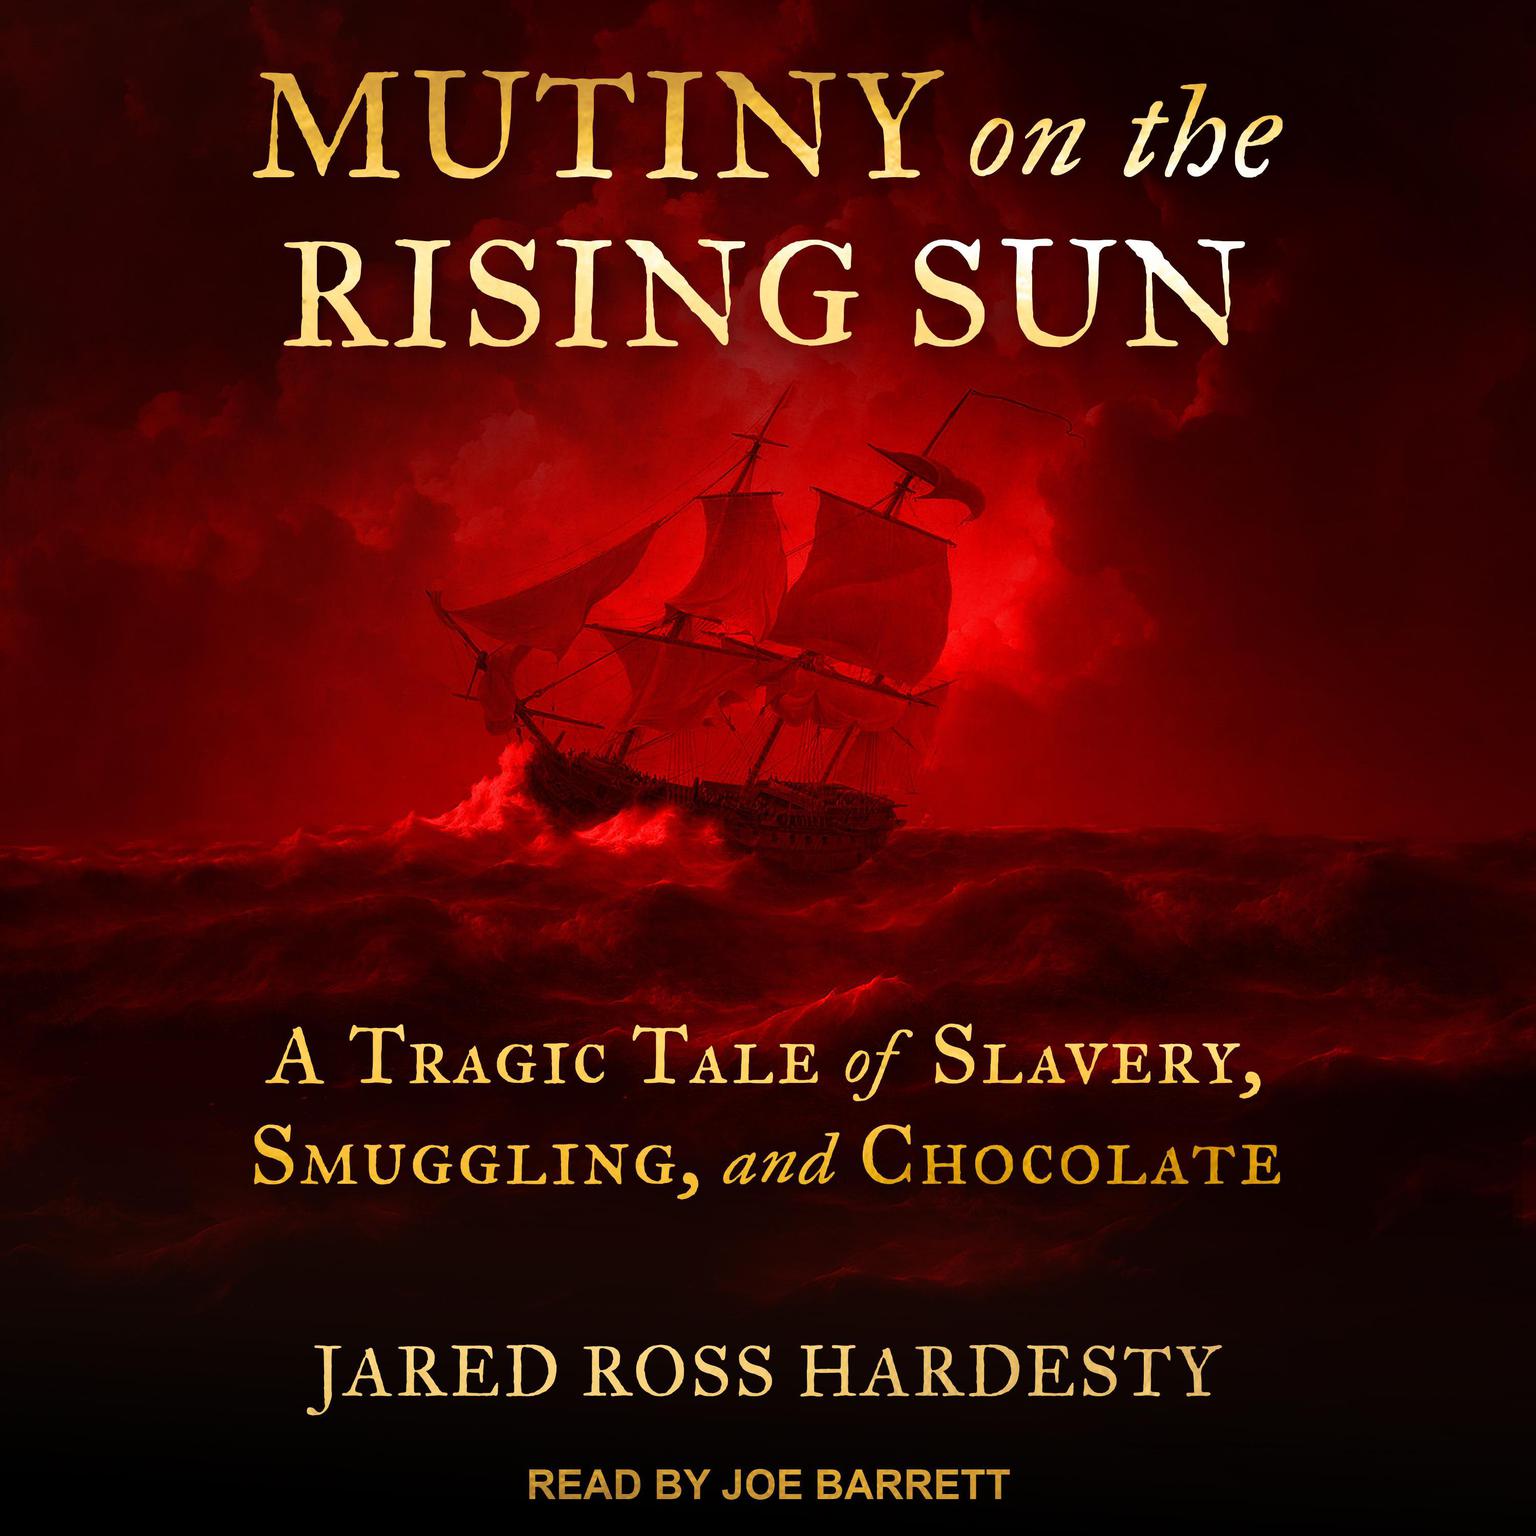 Mutiny on the Rising Sun: A Tragic Tale of Slavery, Smuggling, and Chocolate Audiobook, by Jared Ross Hardesty